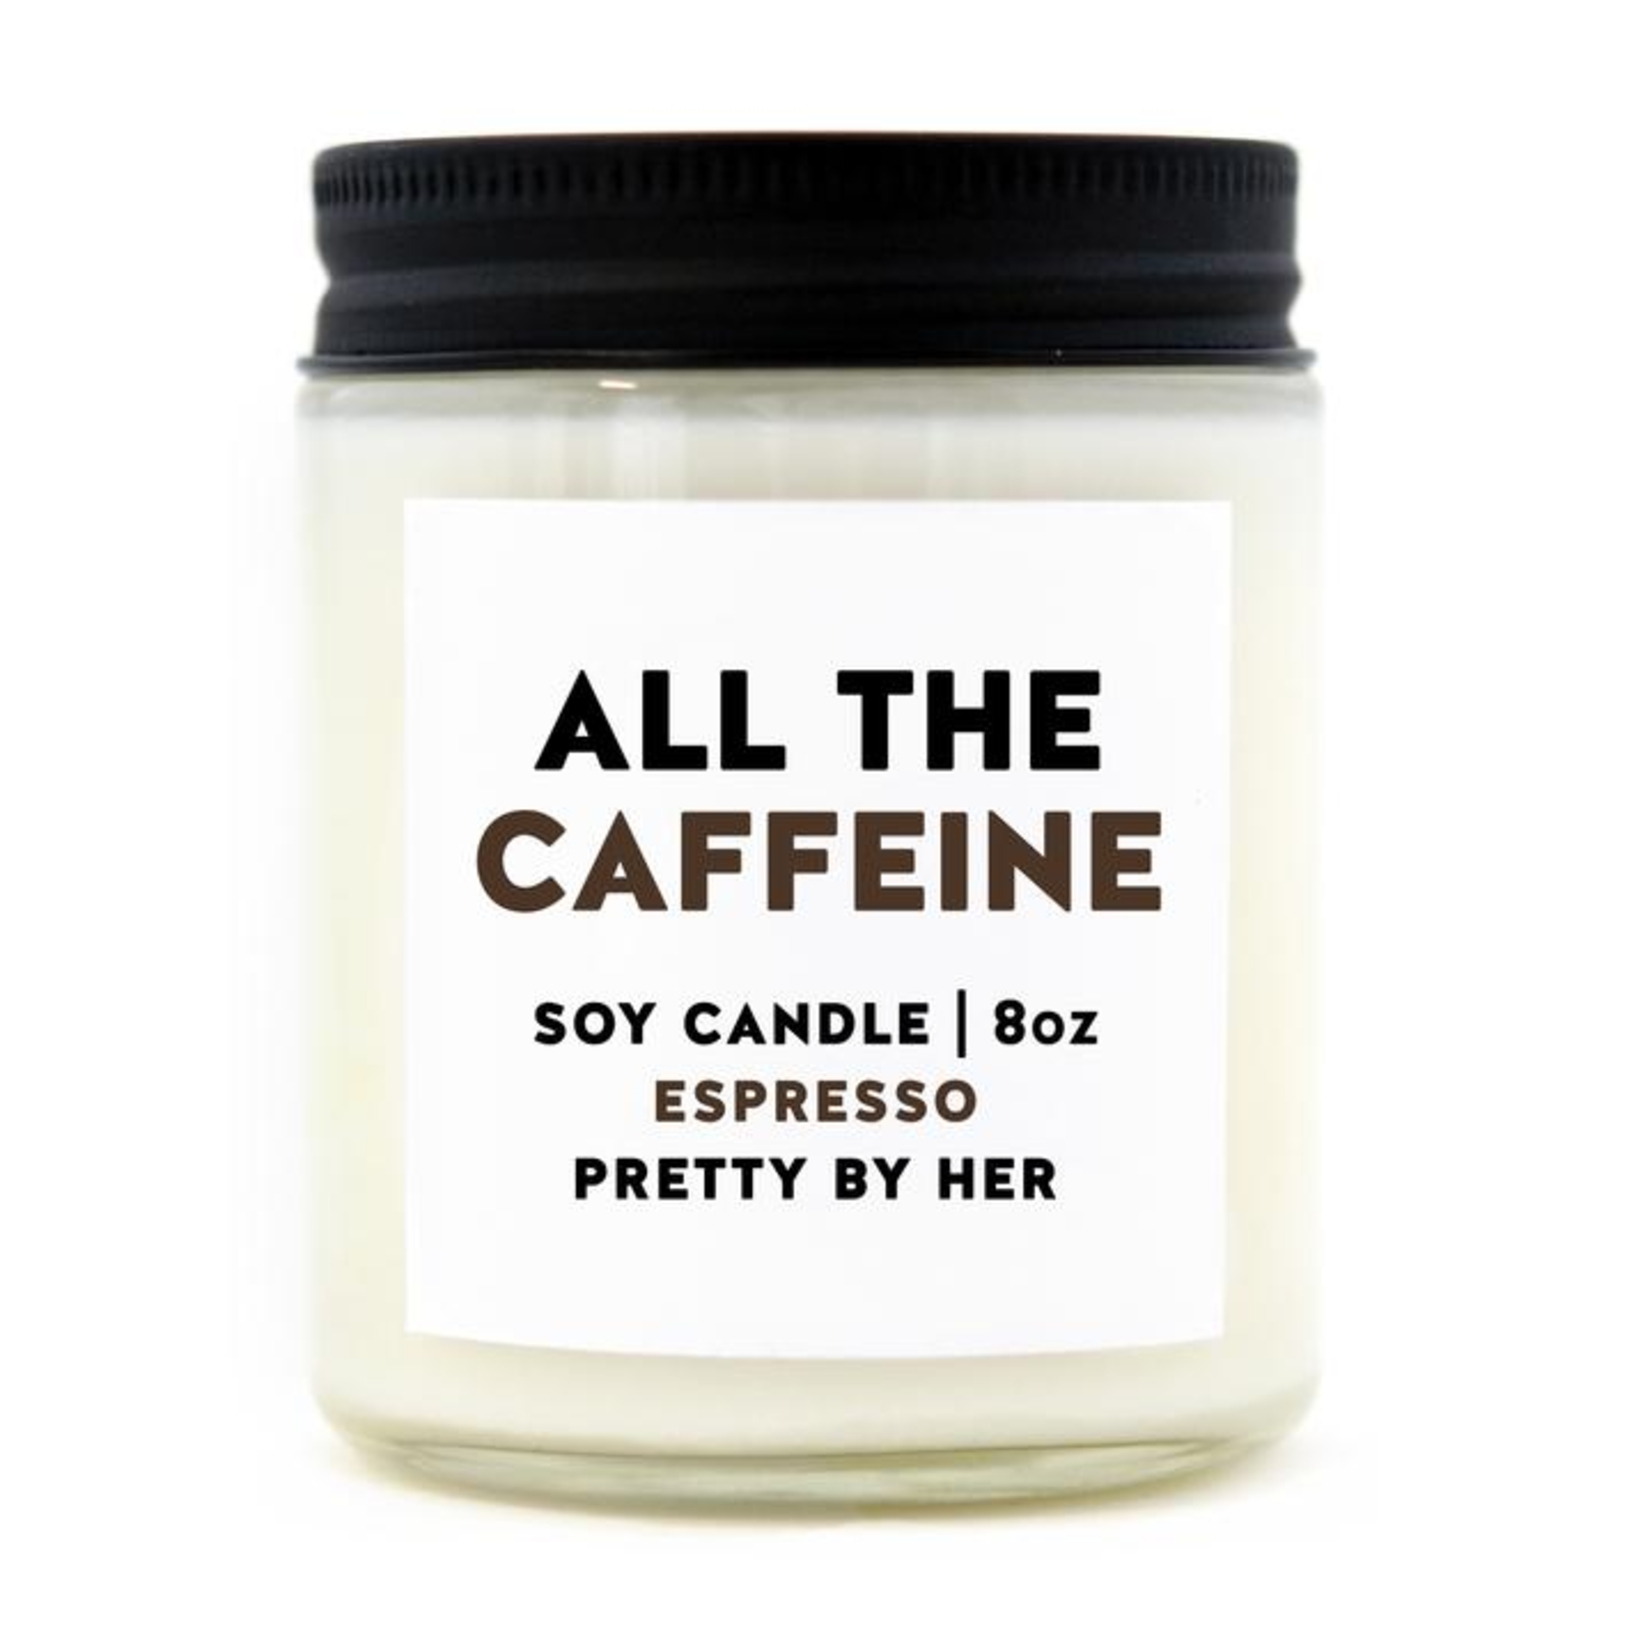 Soy Candle - All the Caffeine